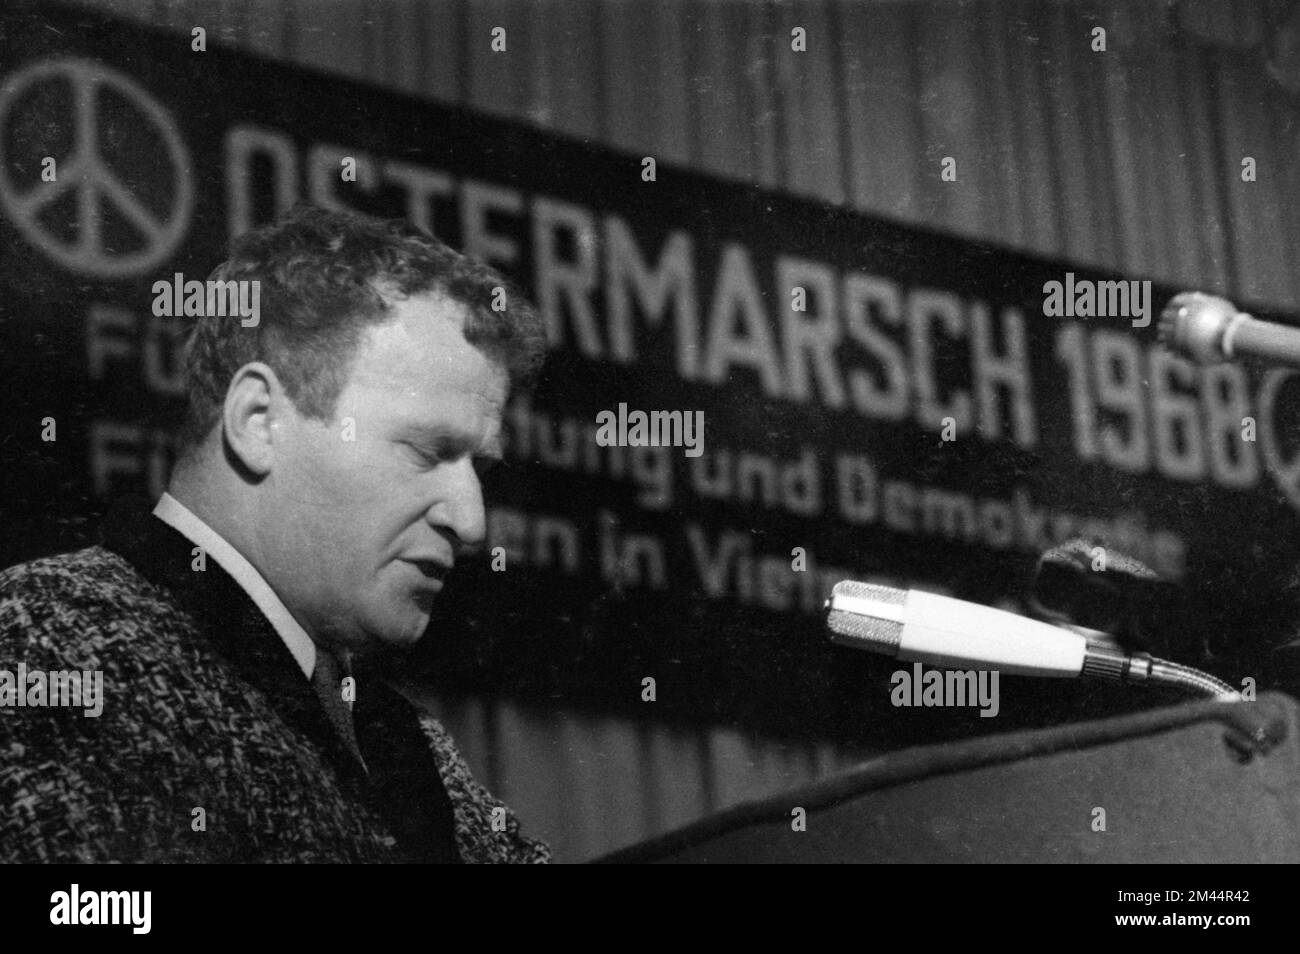 Photos and events from the Ruhr area in the years 1965 to 1971. OM Ruhr 68. Max von der Gruen, Germany Stock Photo